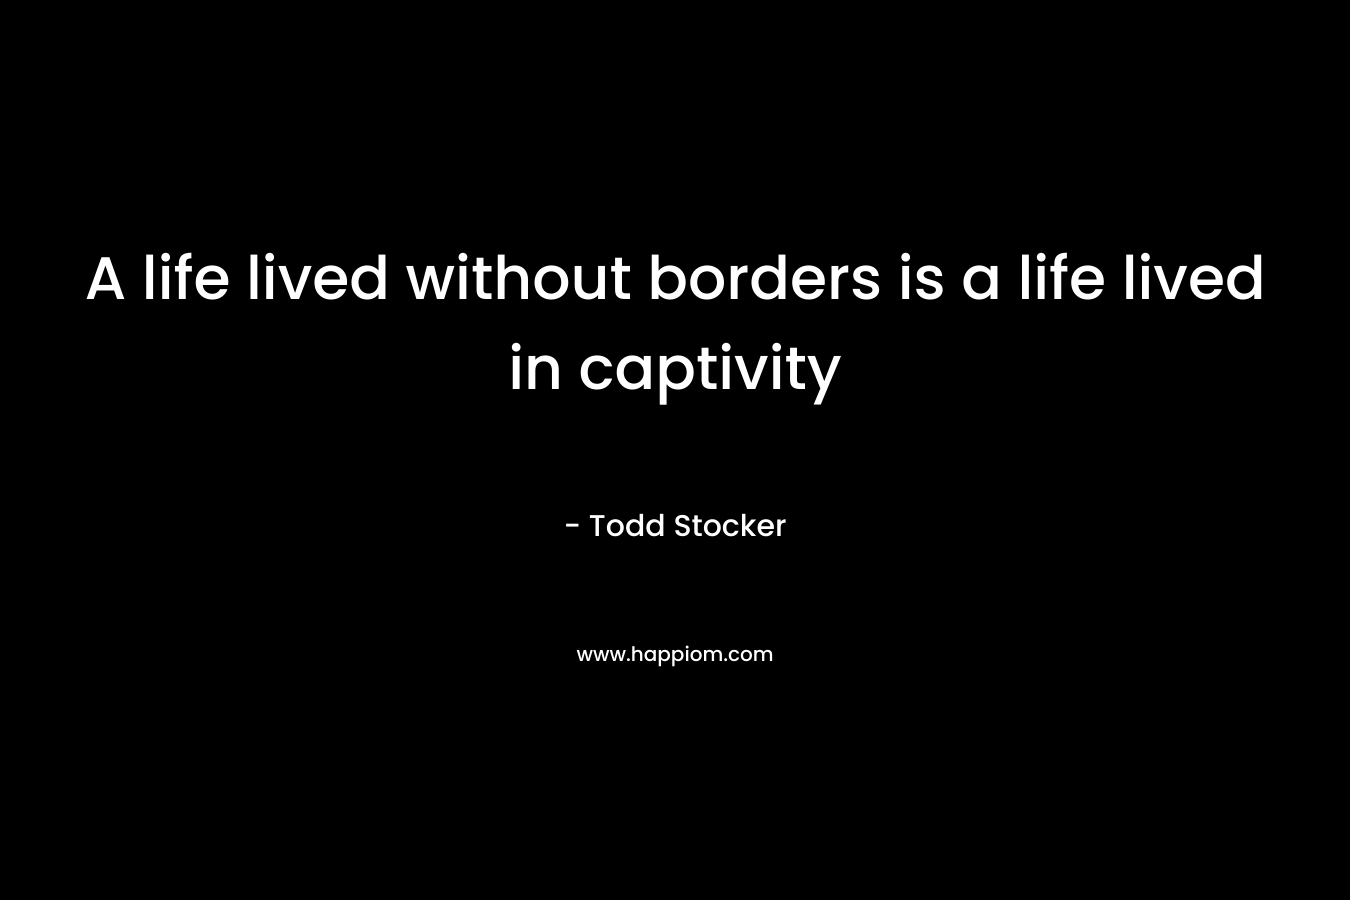 A life lived without borders is a life lived in captivity – Todd Stocker